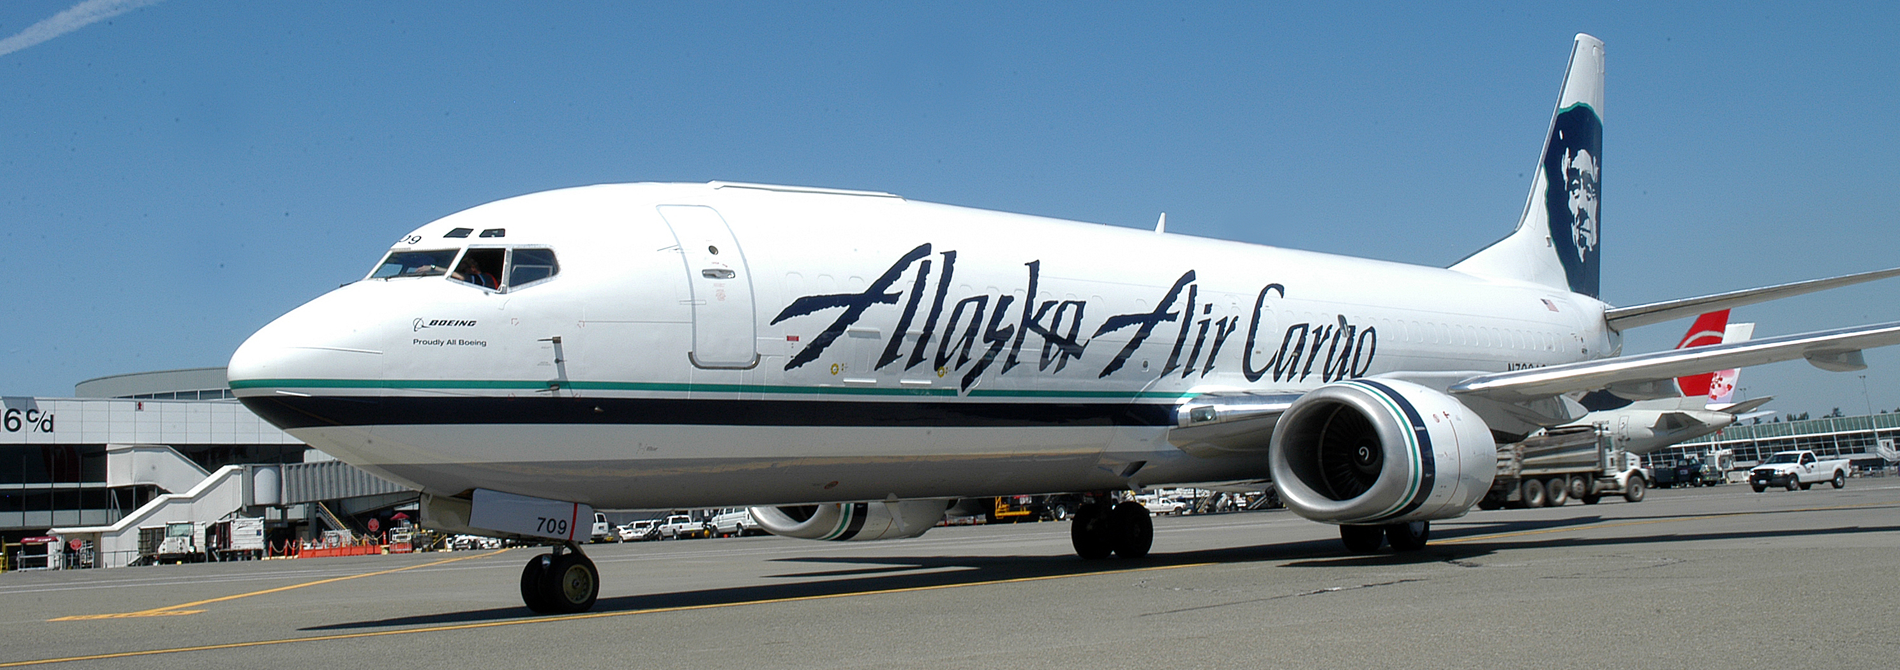   Alaska Air Cargo  Launches Real-time Booking Engine, Powered by   SmartKargo  . 